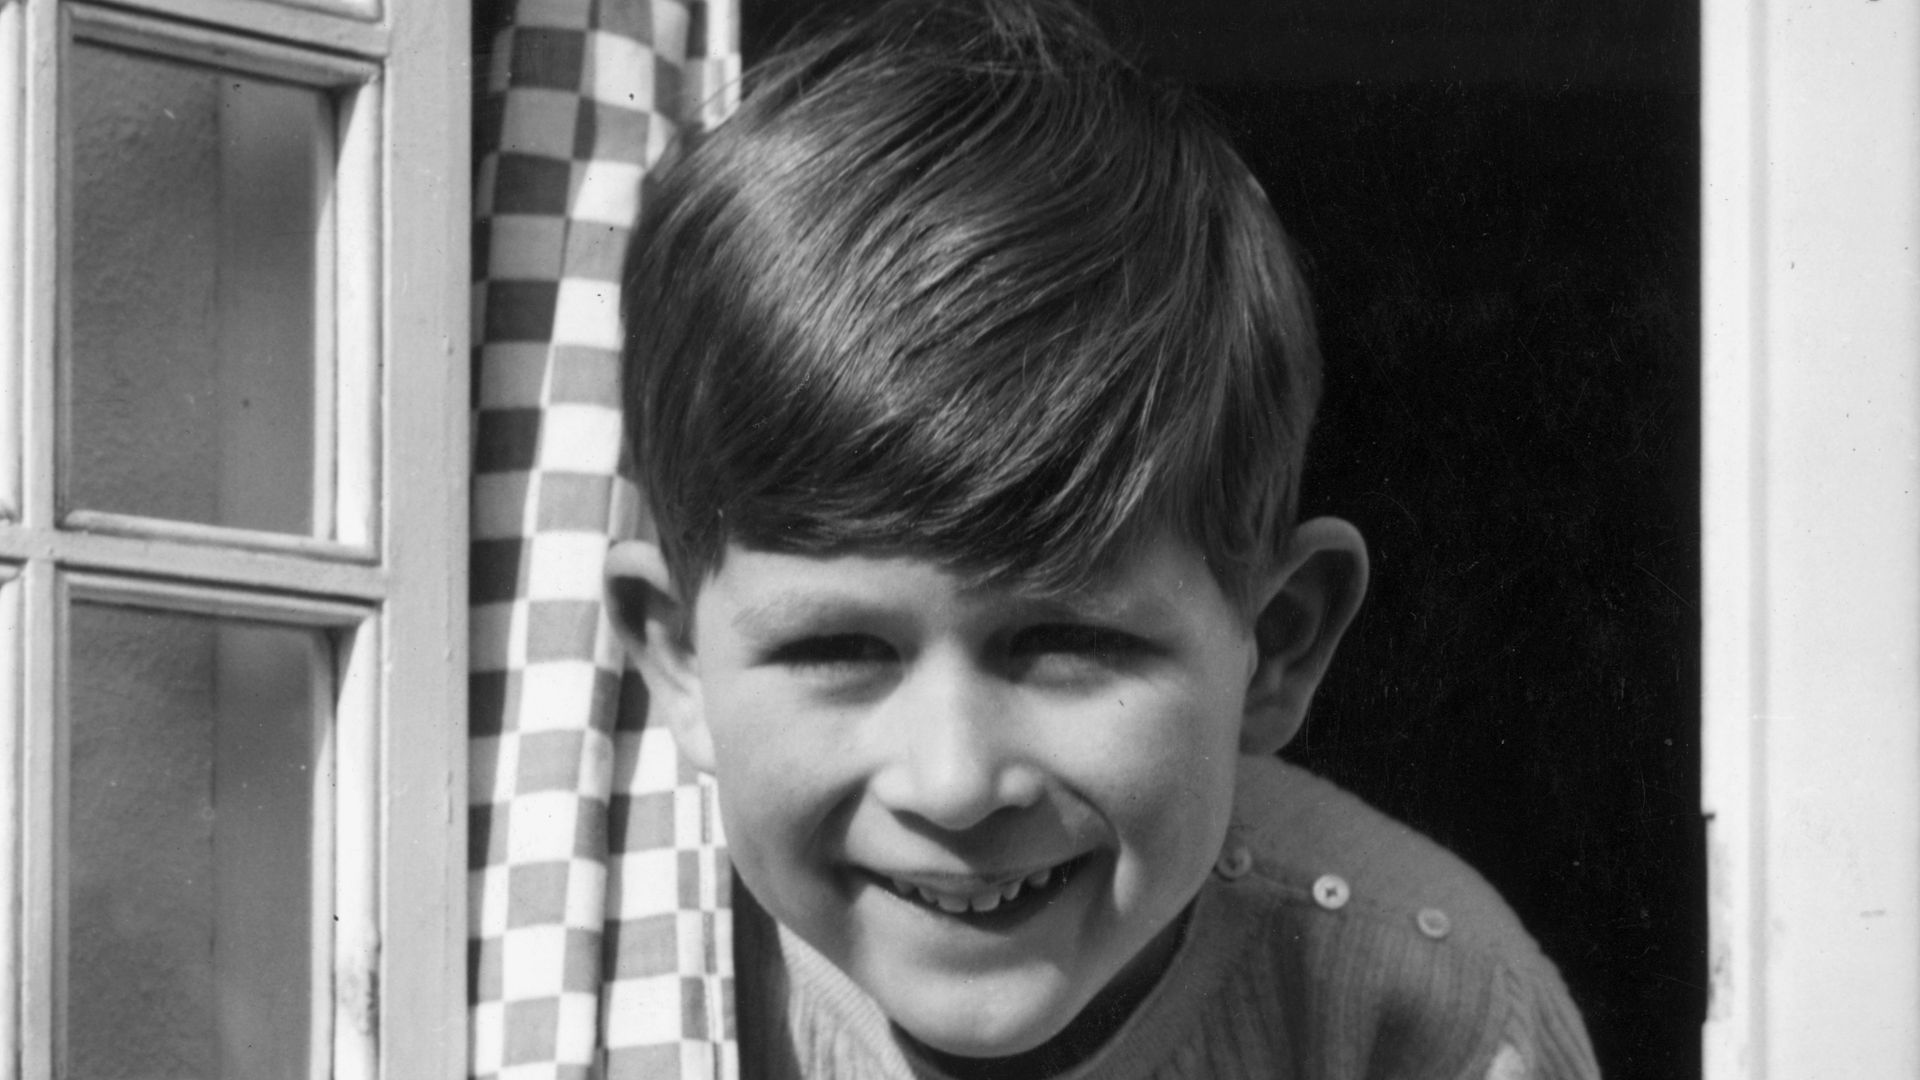 King Charles as a young boy